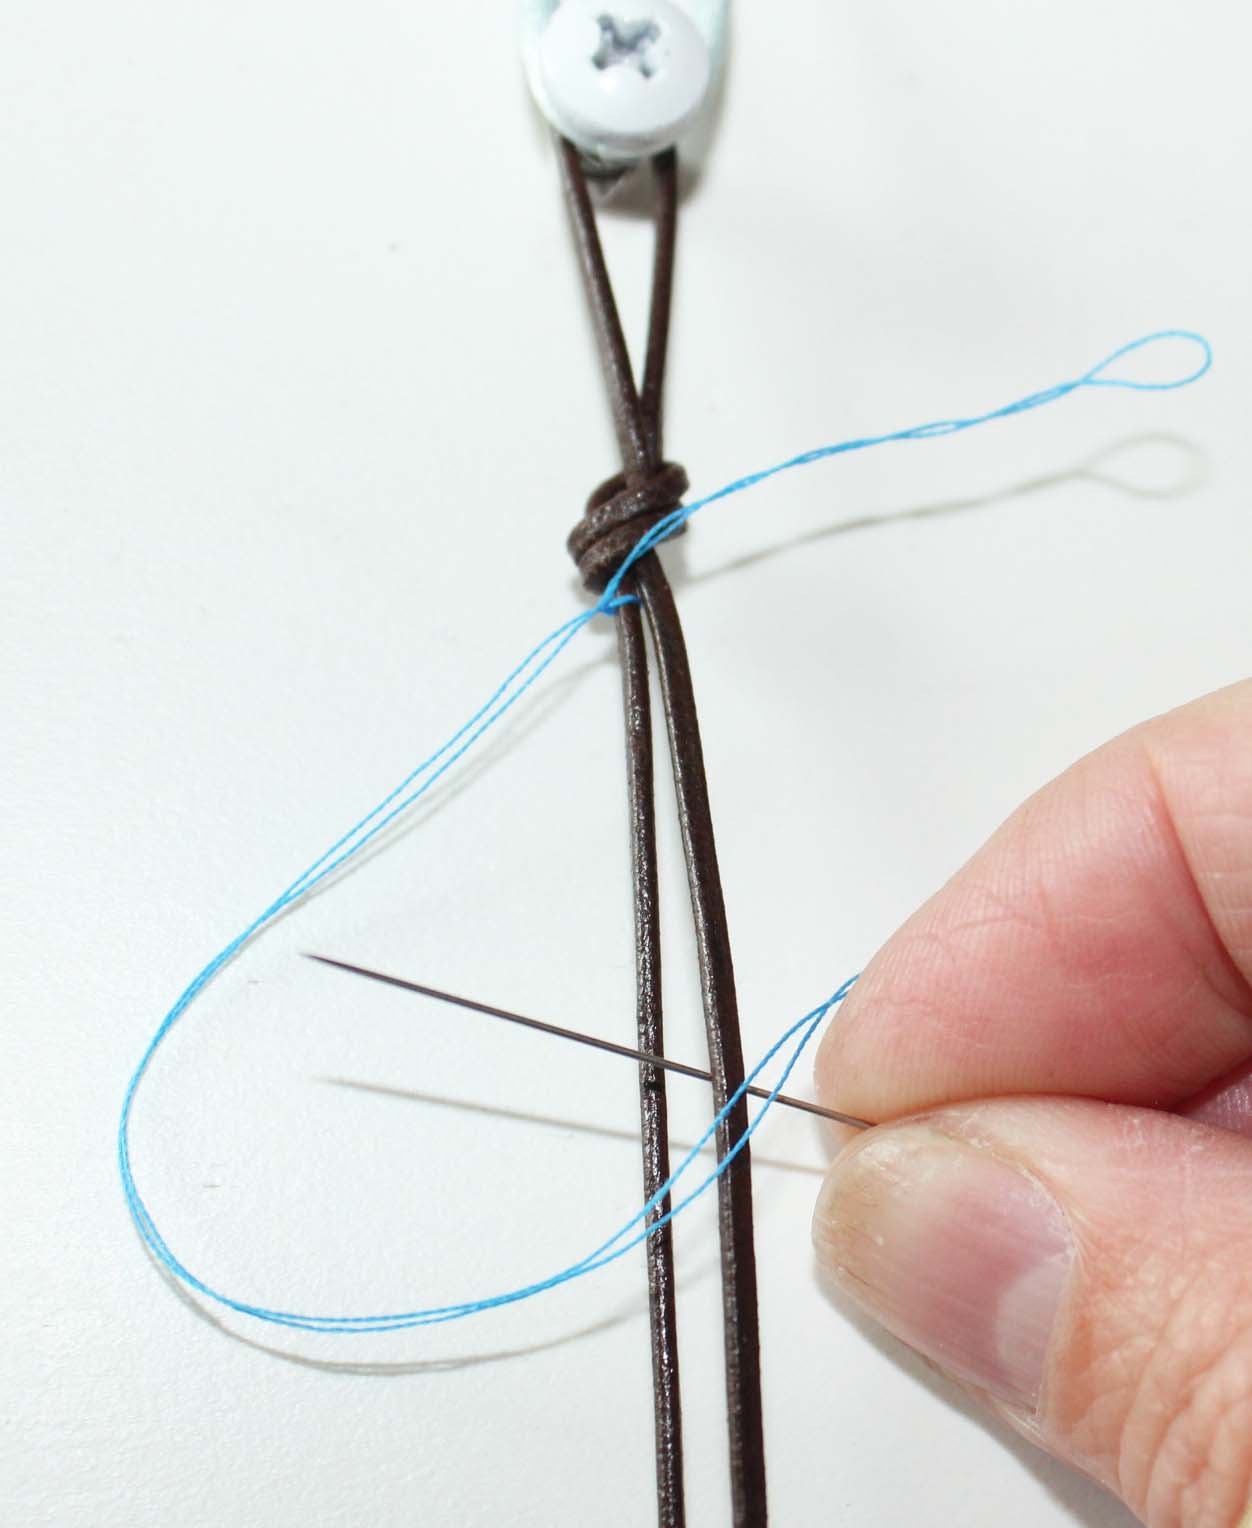 Add thread to leather. Tie on with knot .